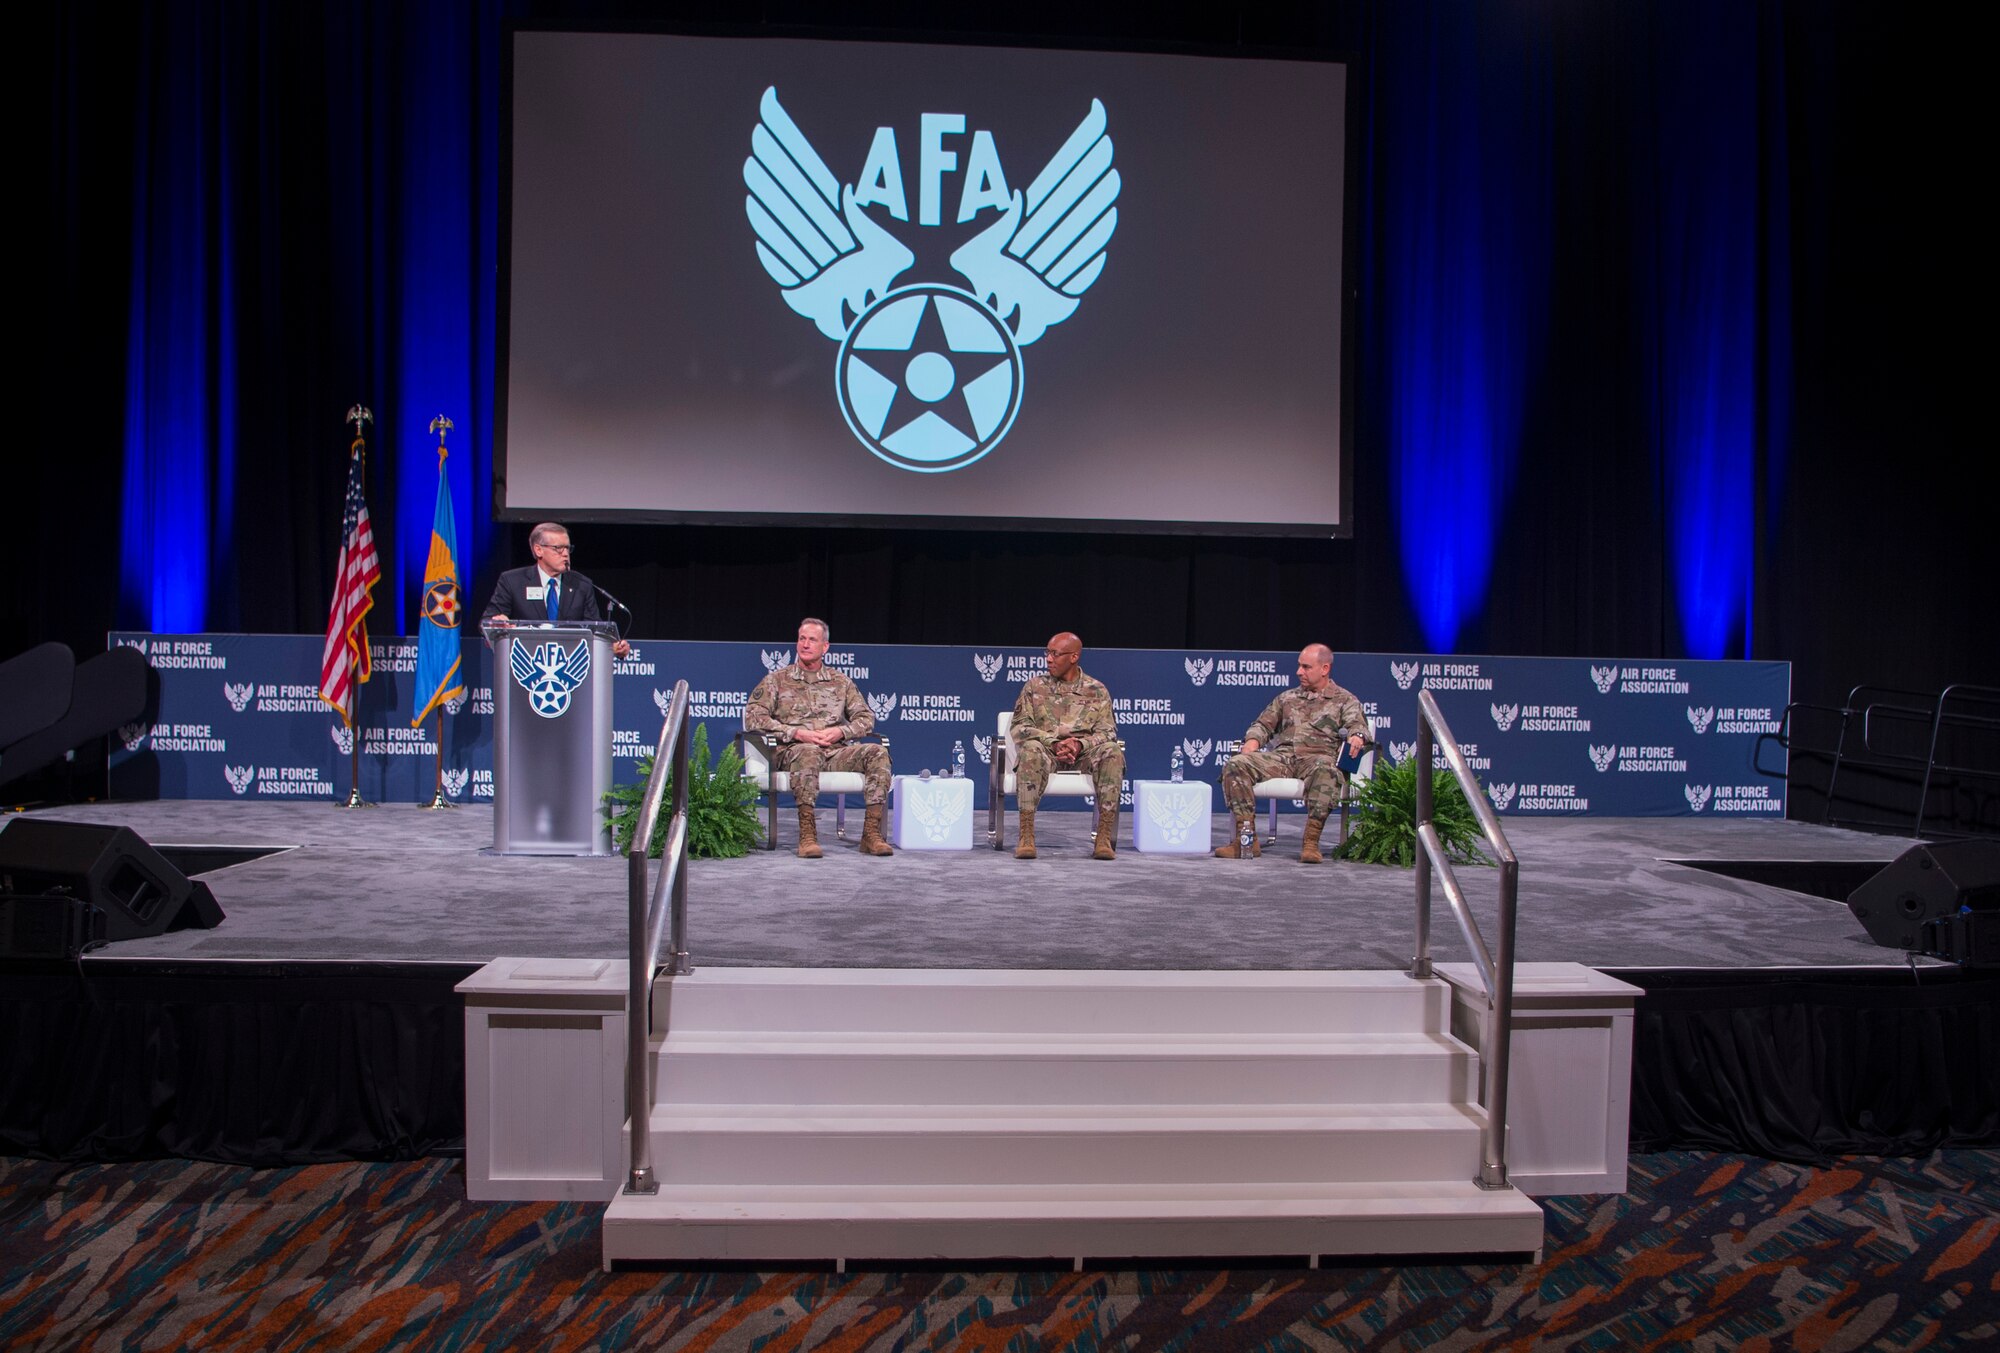 Gen. Jeff Harrigian, U.S. Air Forces in Europe and Air Forces Africa commander (right,) Gen. C.Q. Brown, U.S. Pacific Air Forces commander, and Gen. Terrence J. O'Shaughnessy, U.S. Northern Command and North American Aerospace Defense Command commander, participate in a panel discussion at Air Force Association Air Warfare Symposium on the emerging concept of Joint All-Domain Command and Control at the Air Force Association Air Warfare Symposium in Orlando, Florida, Feb. 27, 2020. JADC2 connects distributed sensors, shooters and data from all domains to all forces. (U.S. Air Force photo by Technical Sgt. Stephen Ocenosak)